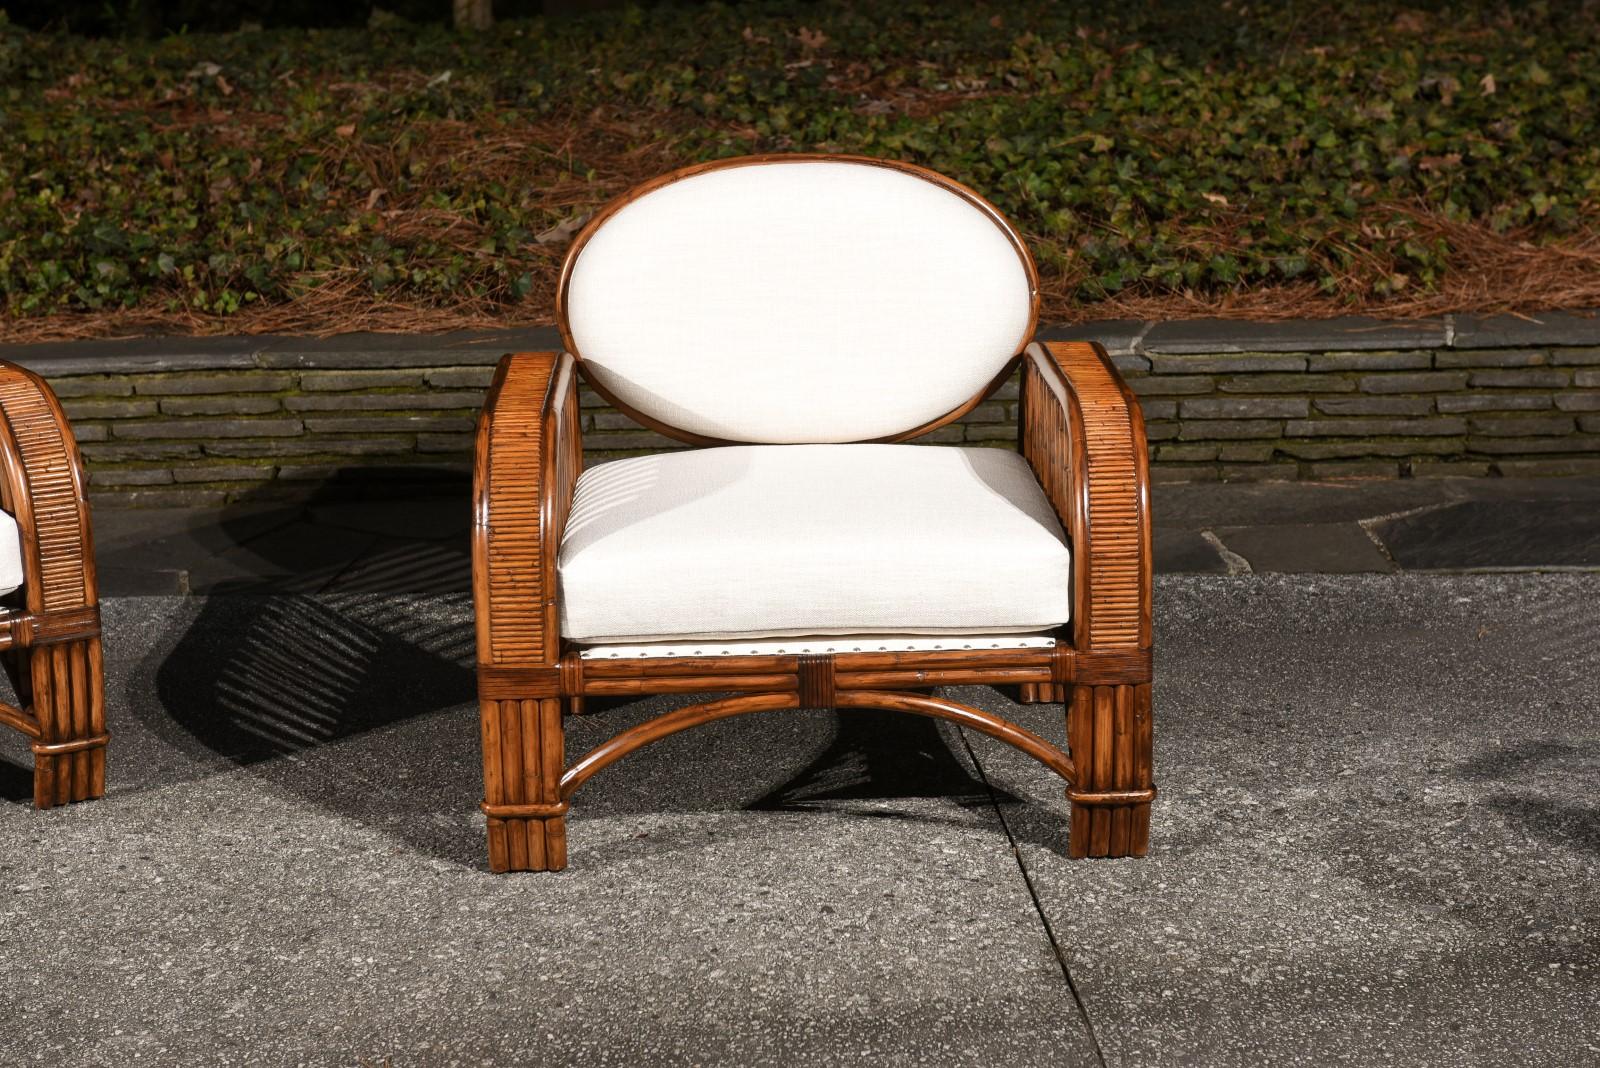 Striking Pair of Art Deco Influenced Club Chairs by Brown Jordan, circa 1980 In Excellent Condition For Sale In Atlanta, GA